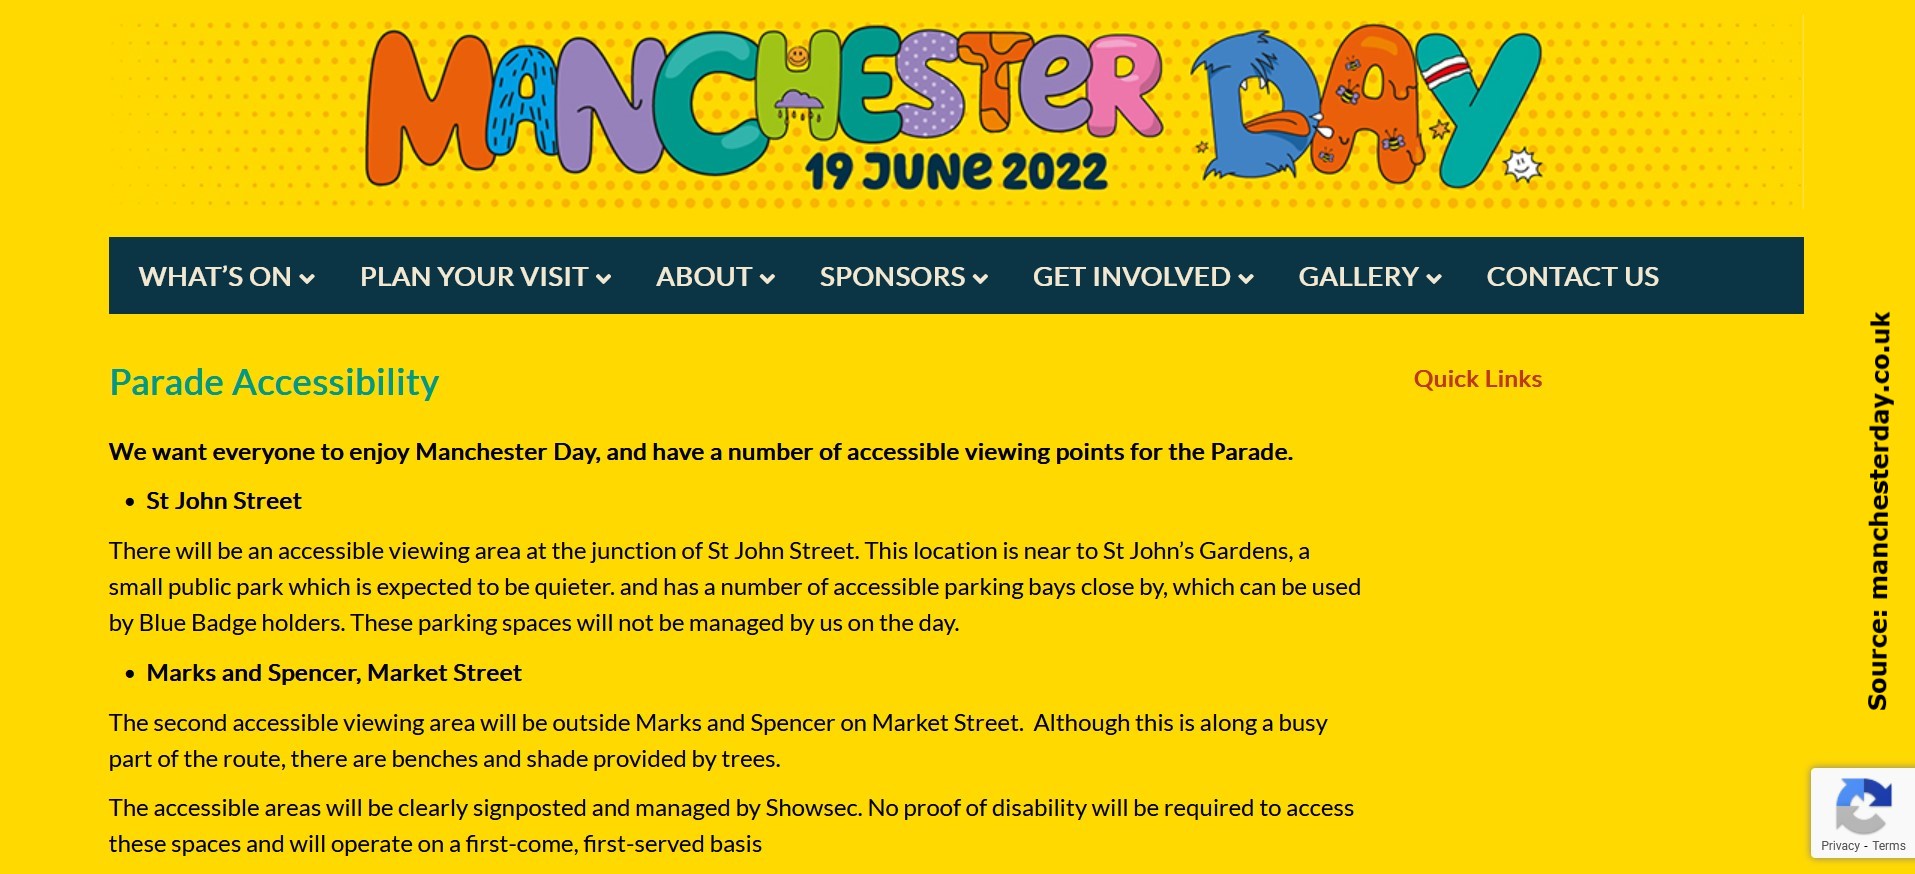 Screenshot of the Parade Accessibility page from the Manchester Day website